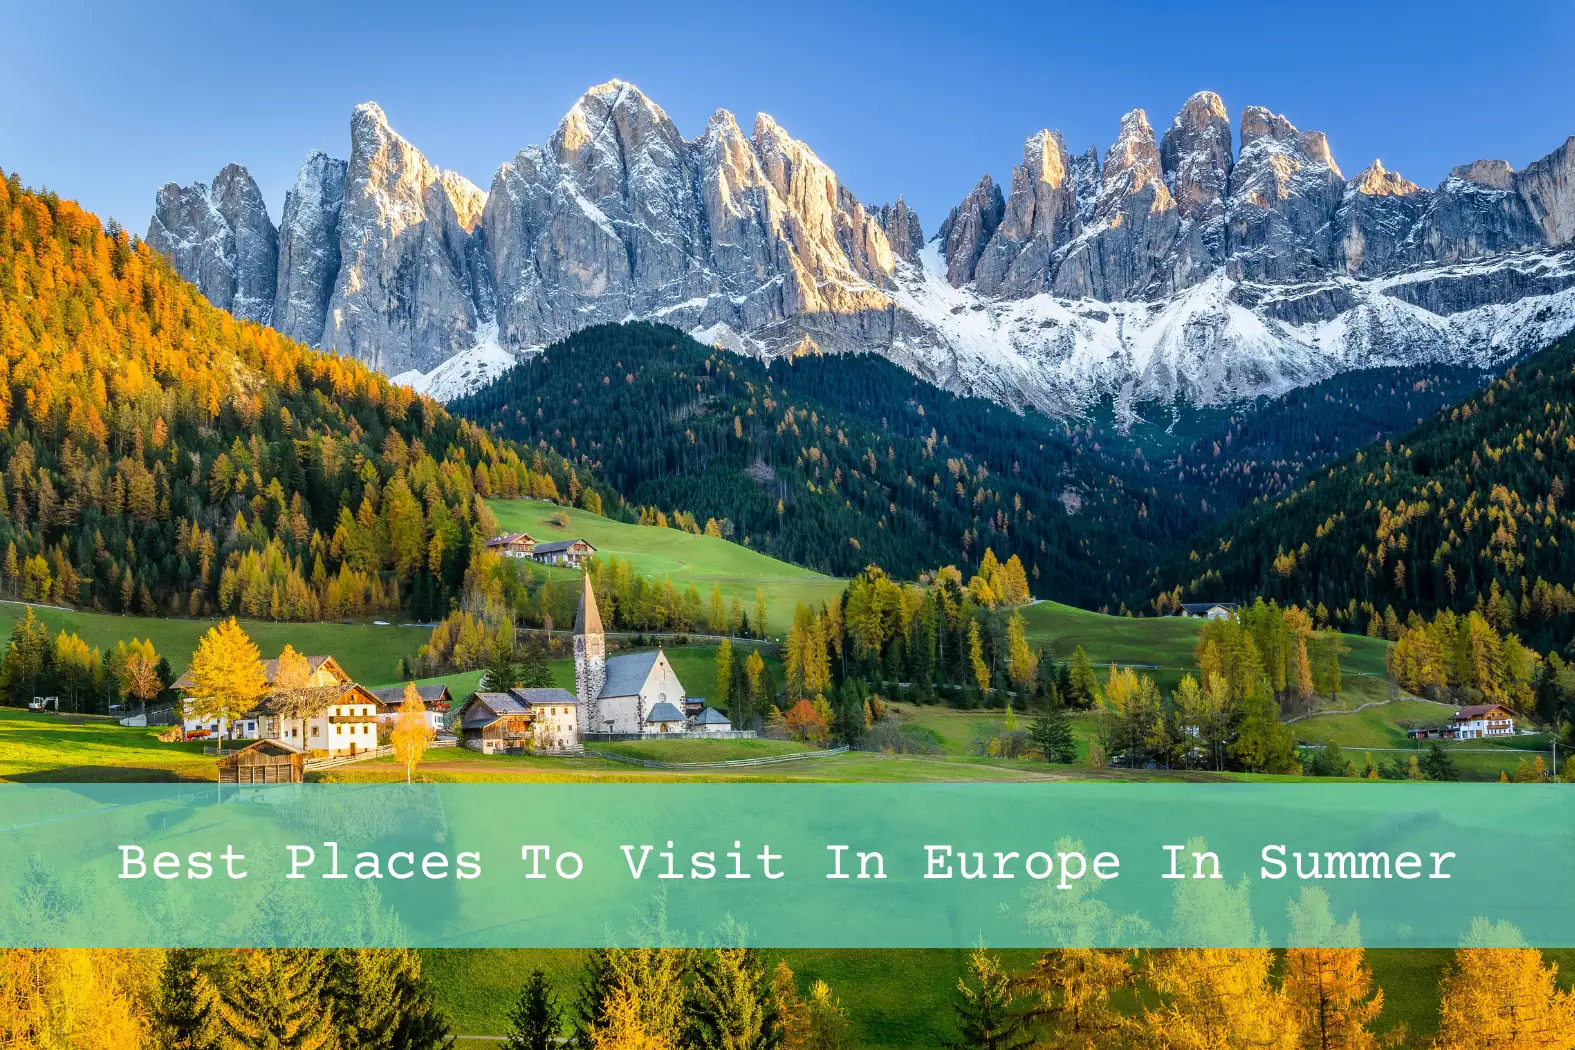 Best Places To Visit In Europe In Summer (Pictured - The Dolomites)